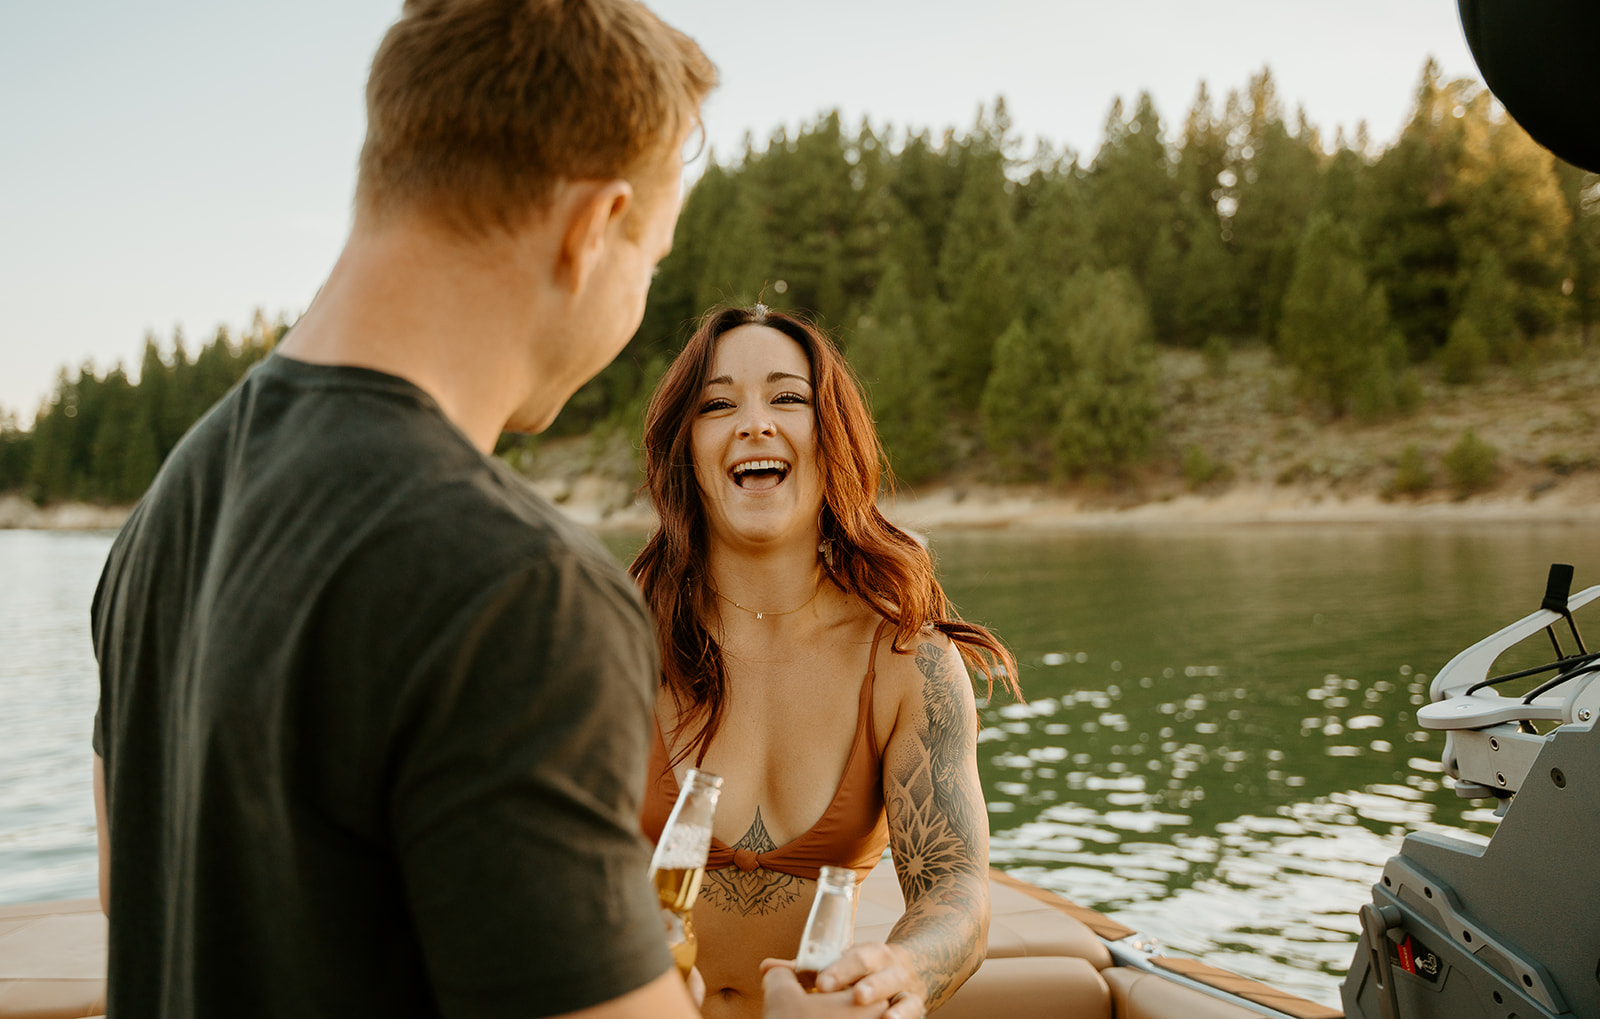 corona beers always bring smiles during my couples photos.